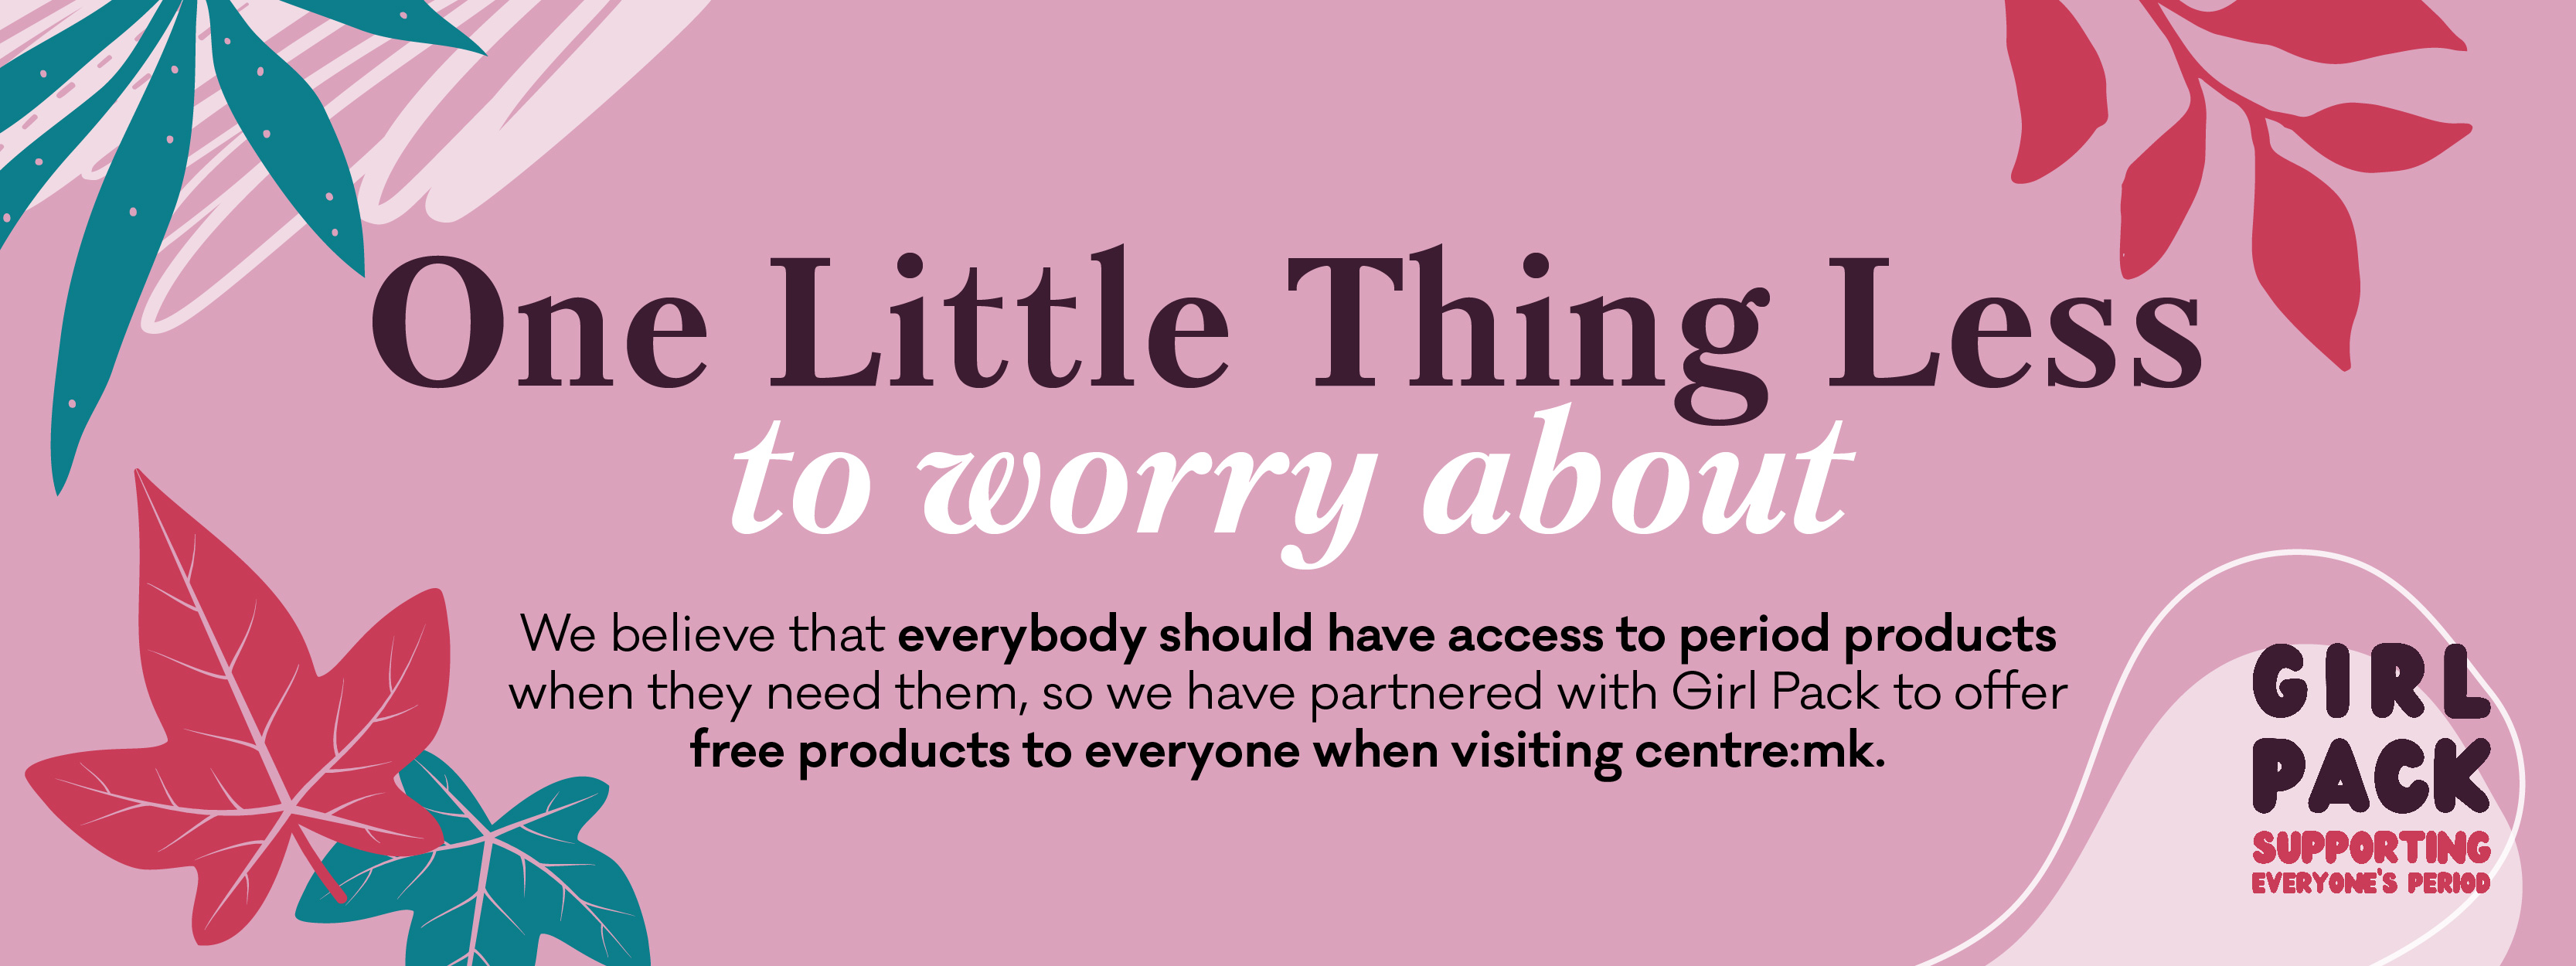 One Little Thing Less to Worry About